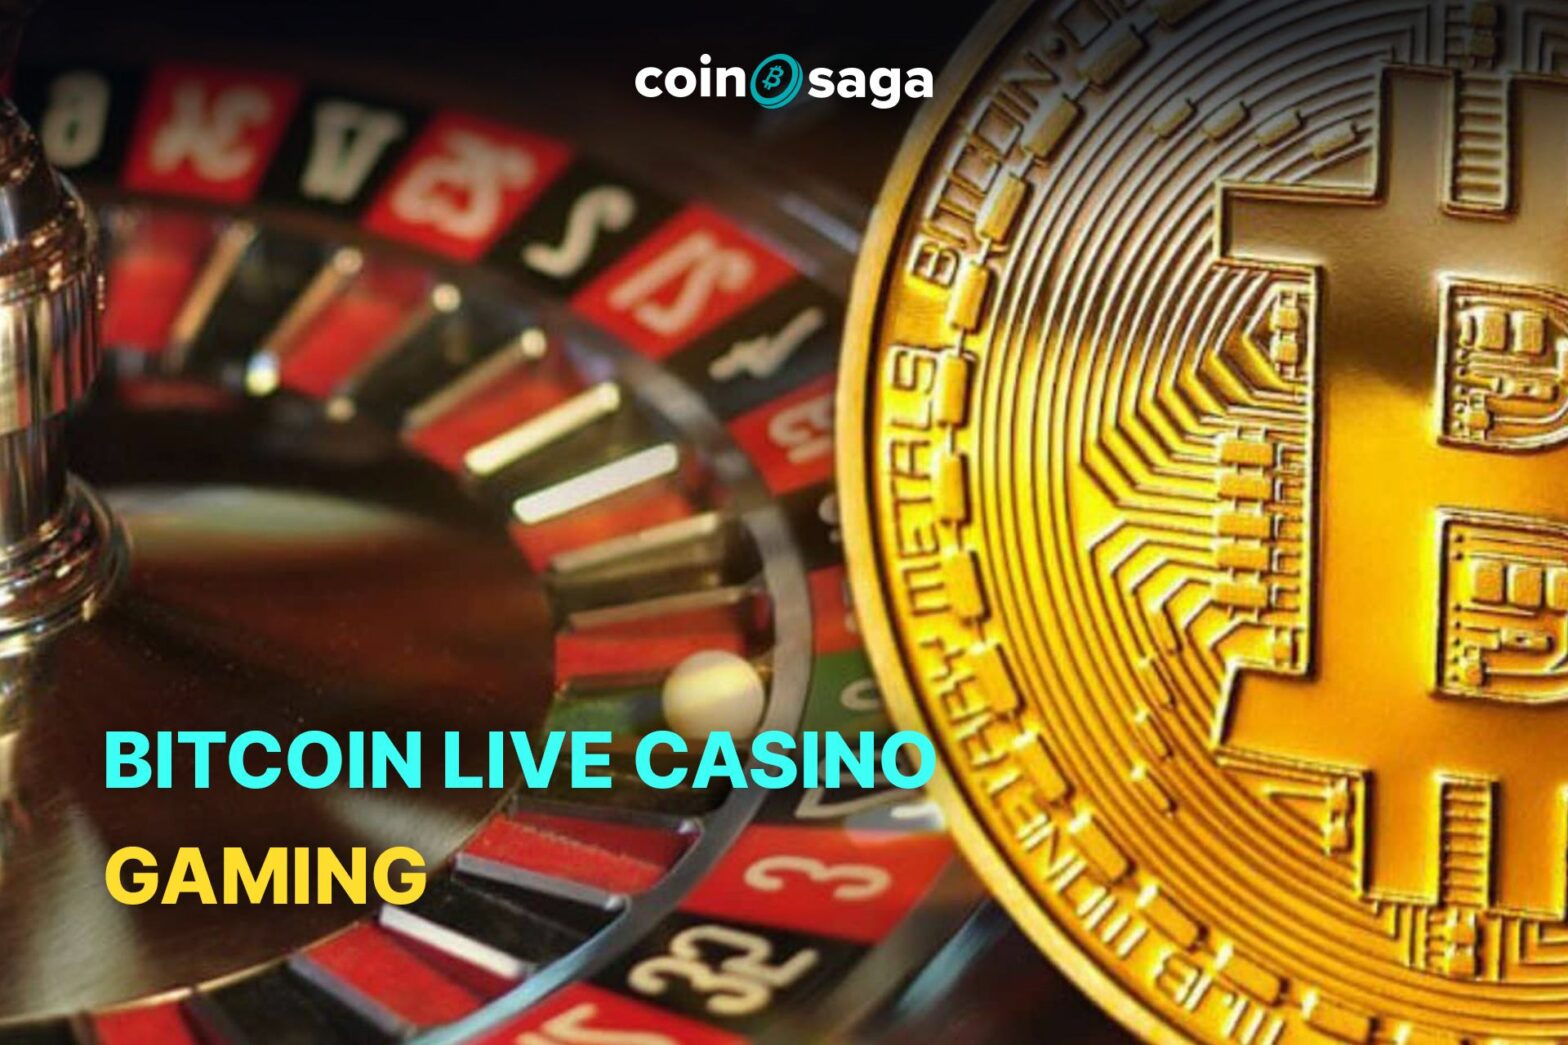 Finding Customers With btc casinos Part B